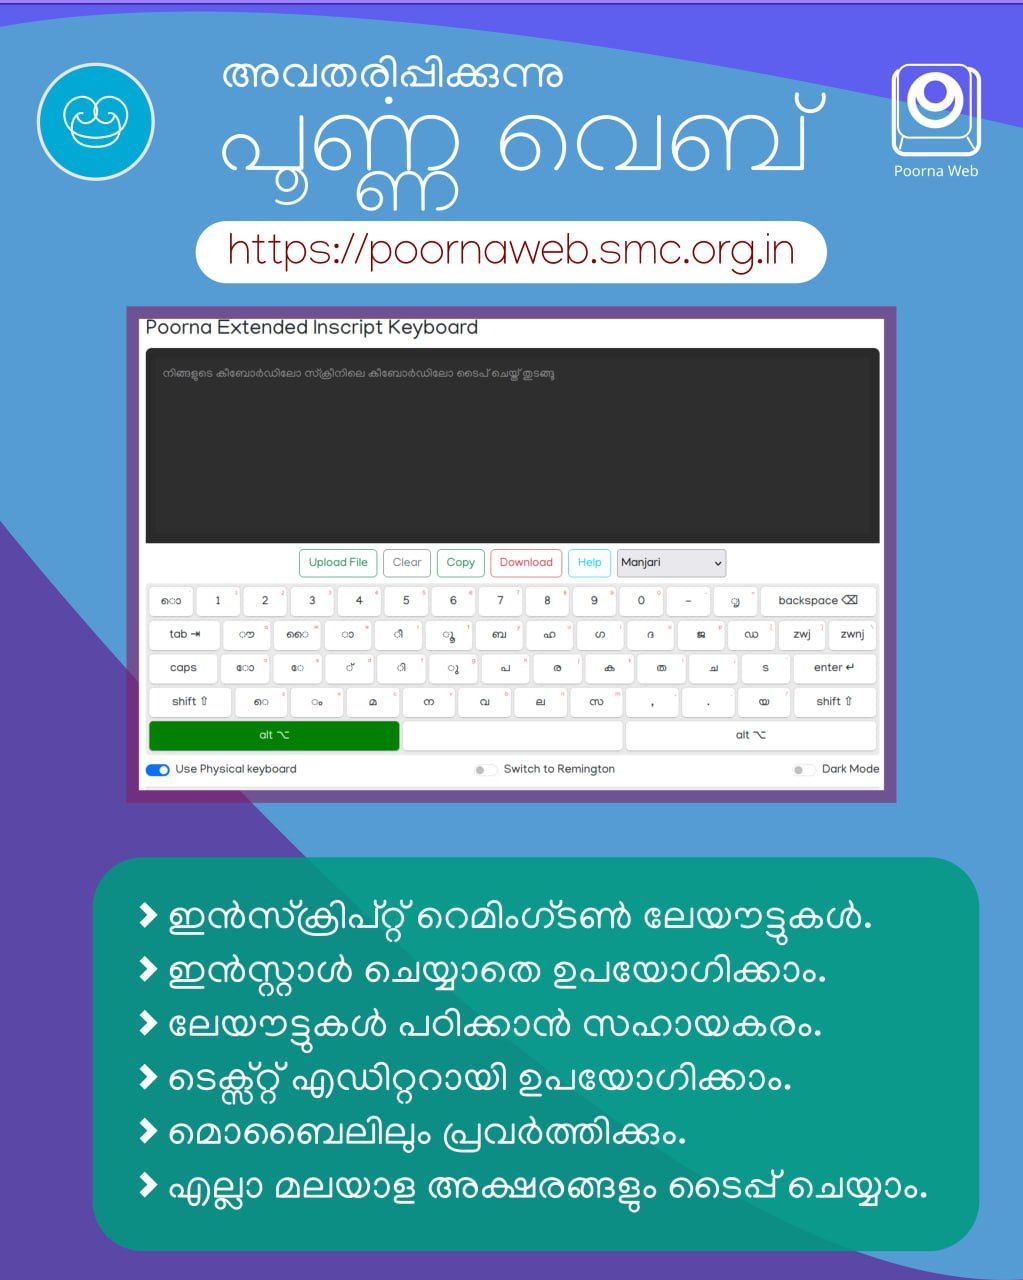 Announcing Poorna Web: The Web Editor for Poorna Keyboard Layout